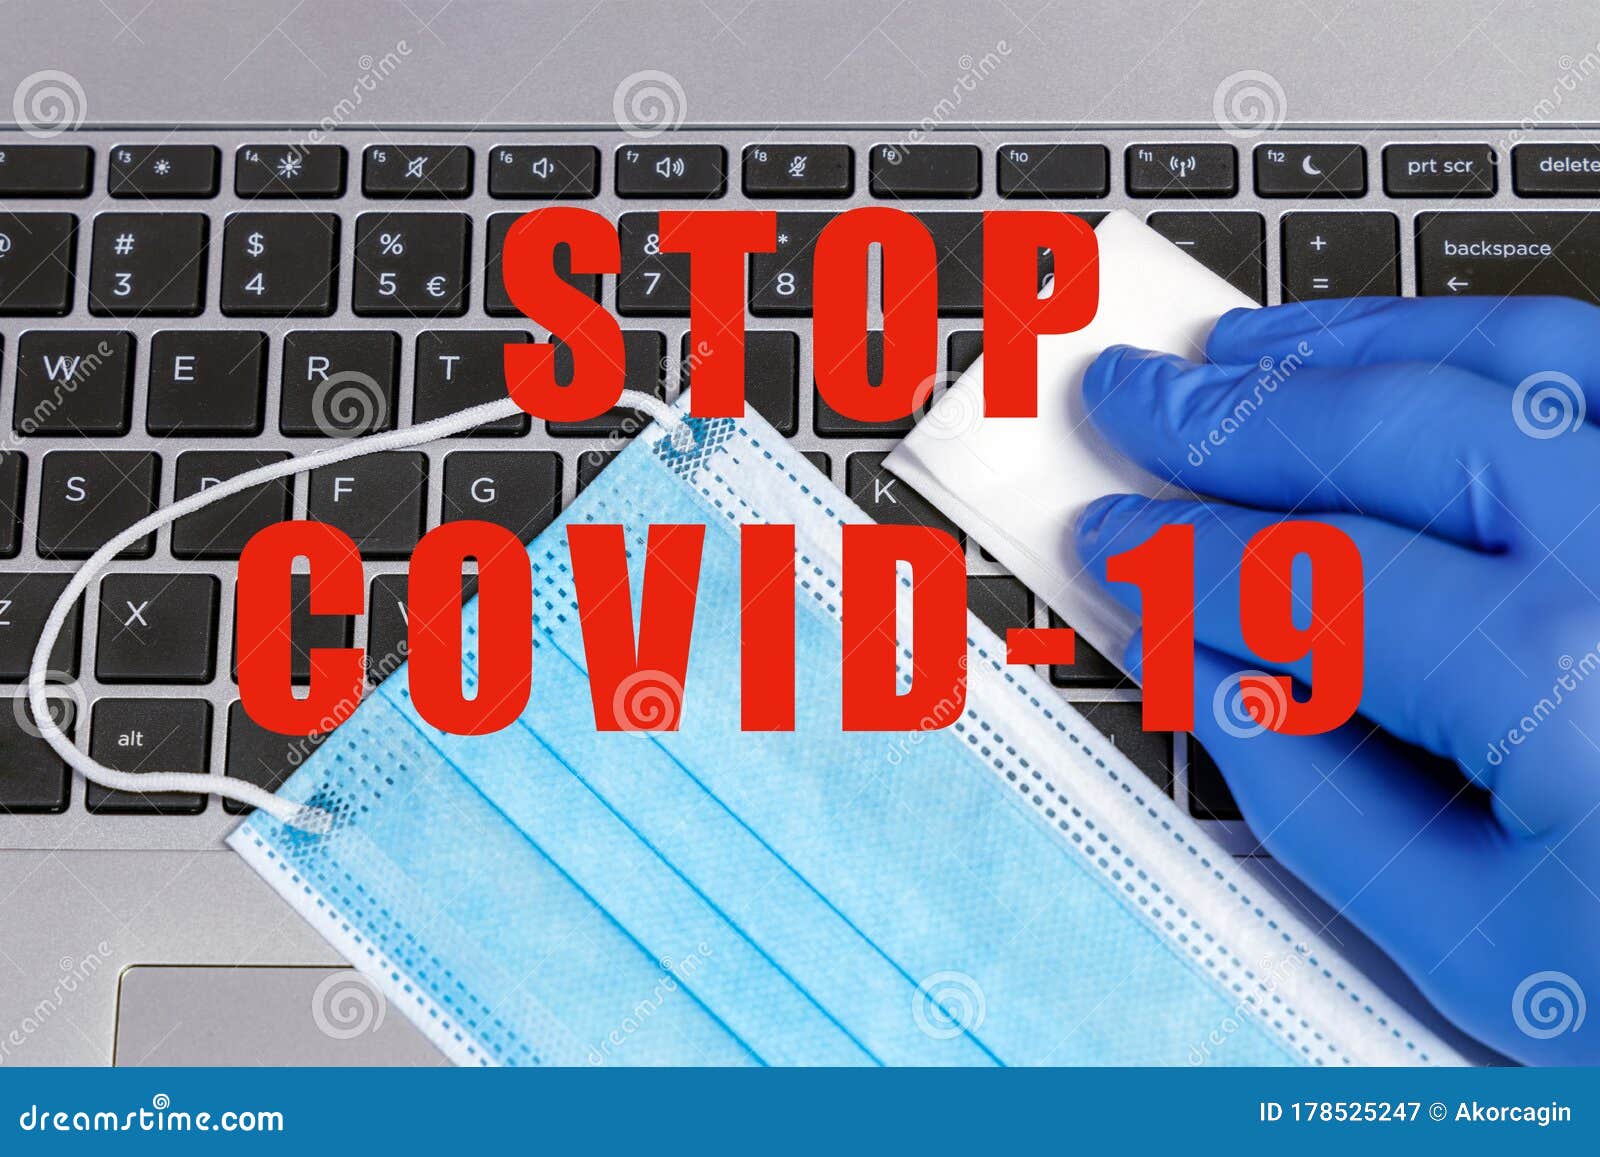 stop covid-19 coronavirus prevention concept disinfection of workspace person cleaning laptop keybord with disinfecting wipes